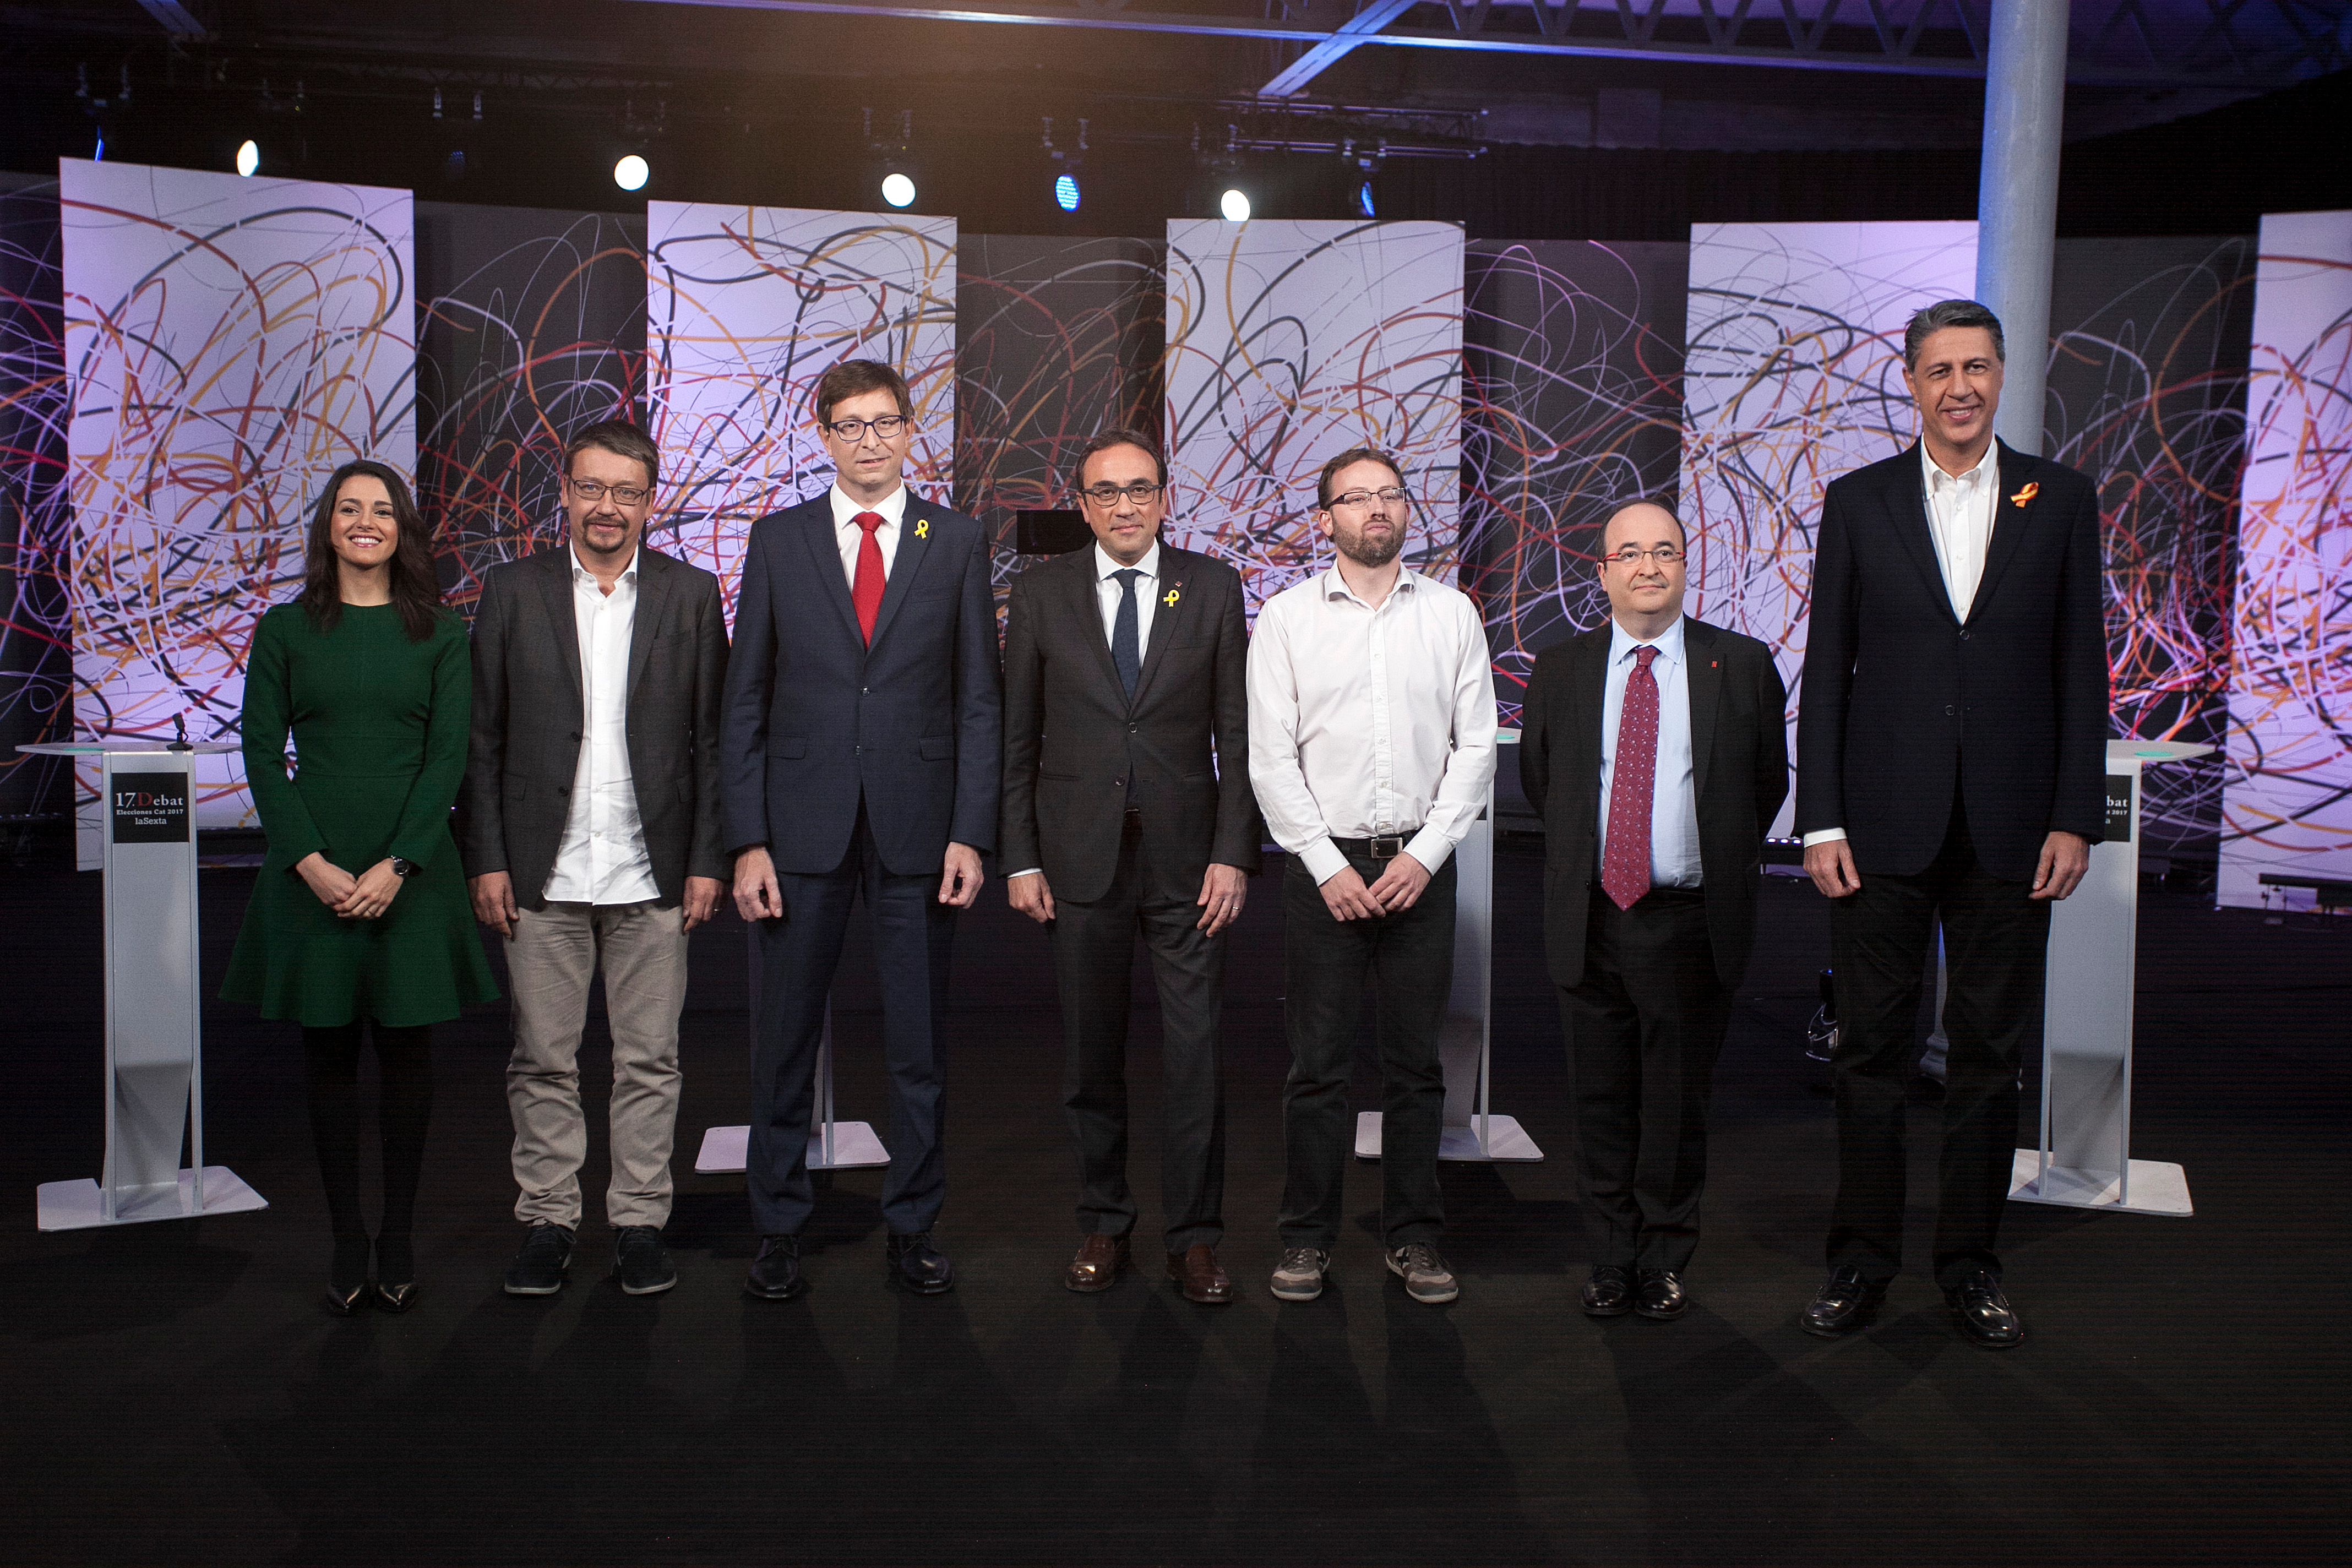 Representatives from the seven main parties in the December 21 Catalan elections at their debate on 'La Sexta' television station (by 'La Sexta')